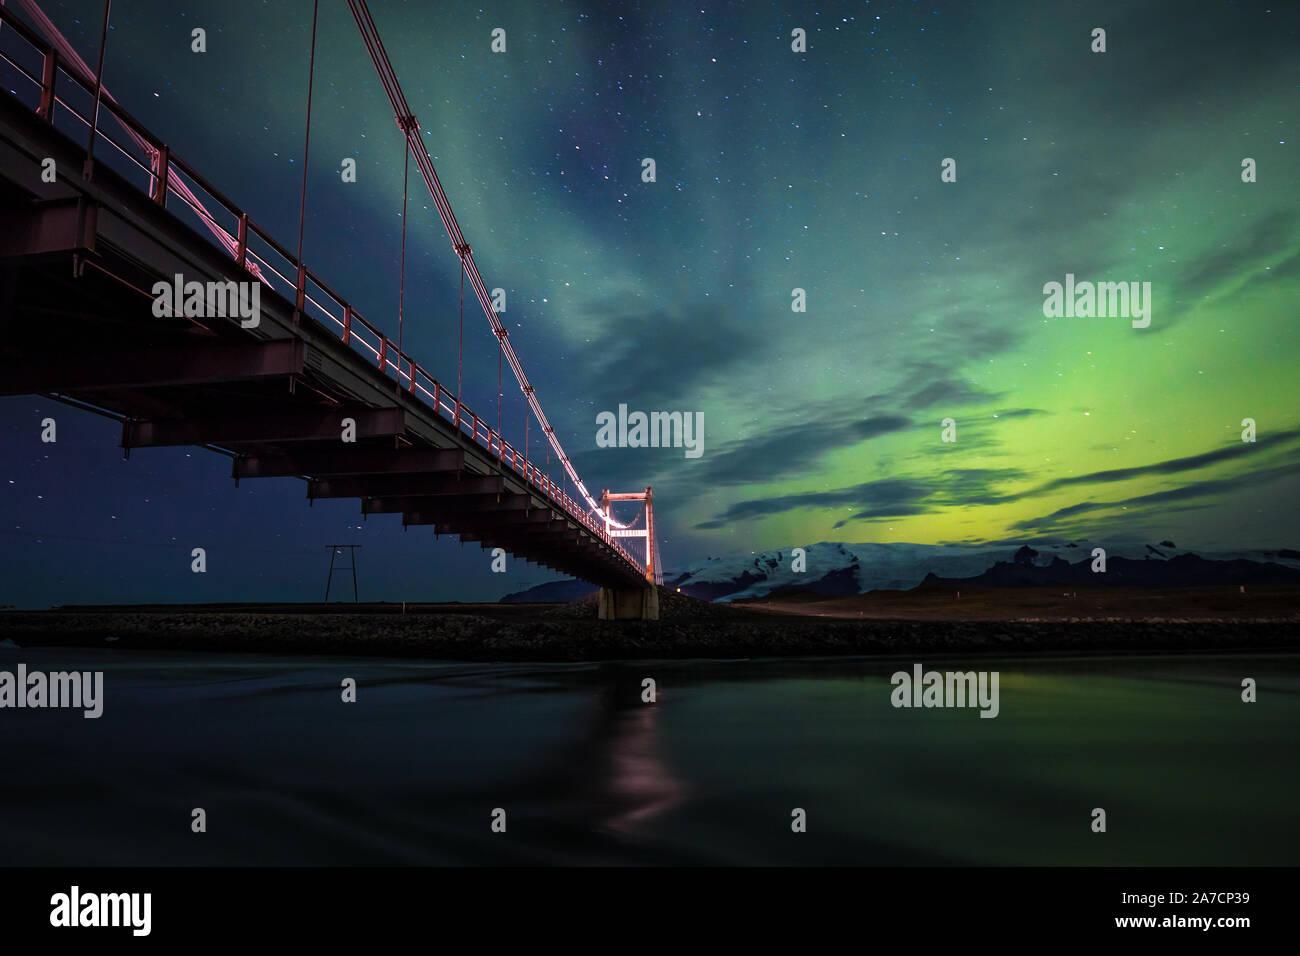 A wonderful night at the Jökulsarlon Glacier Lagoon in Iceland, enjoying the amazing Aurora. I´ve used the bridge to have a nice leading line in frame... Stock Photo